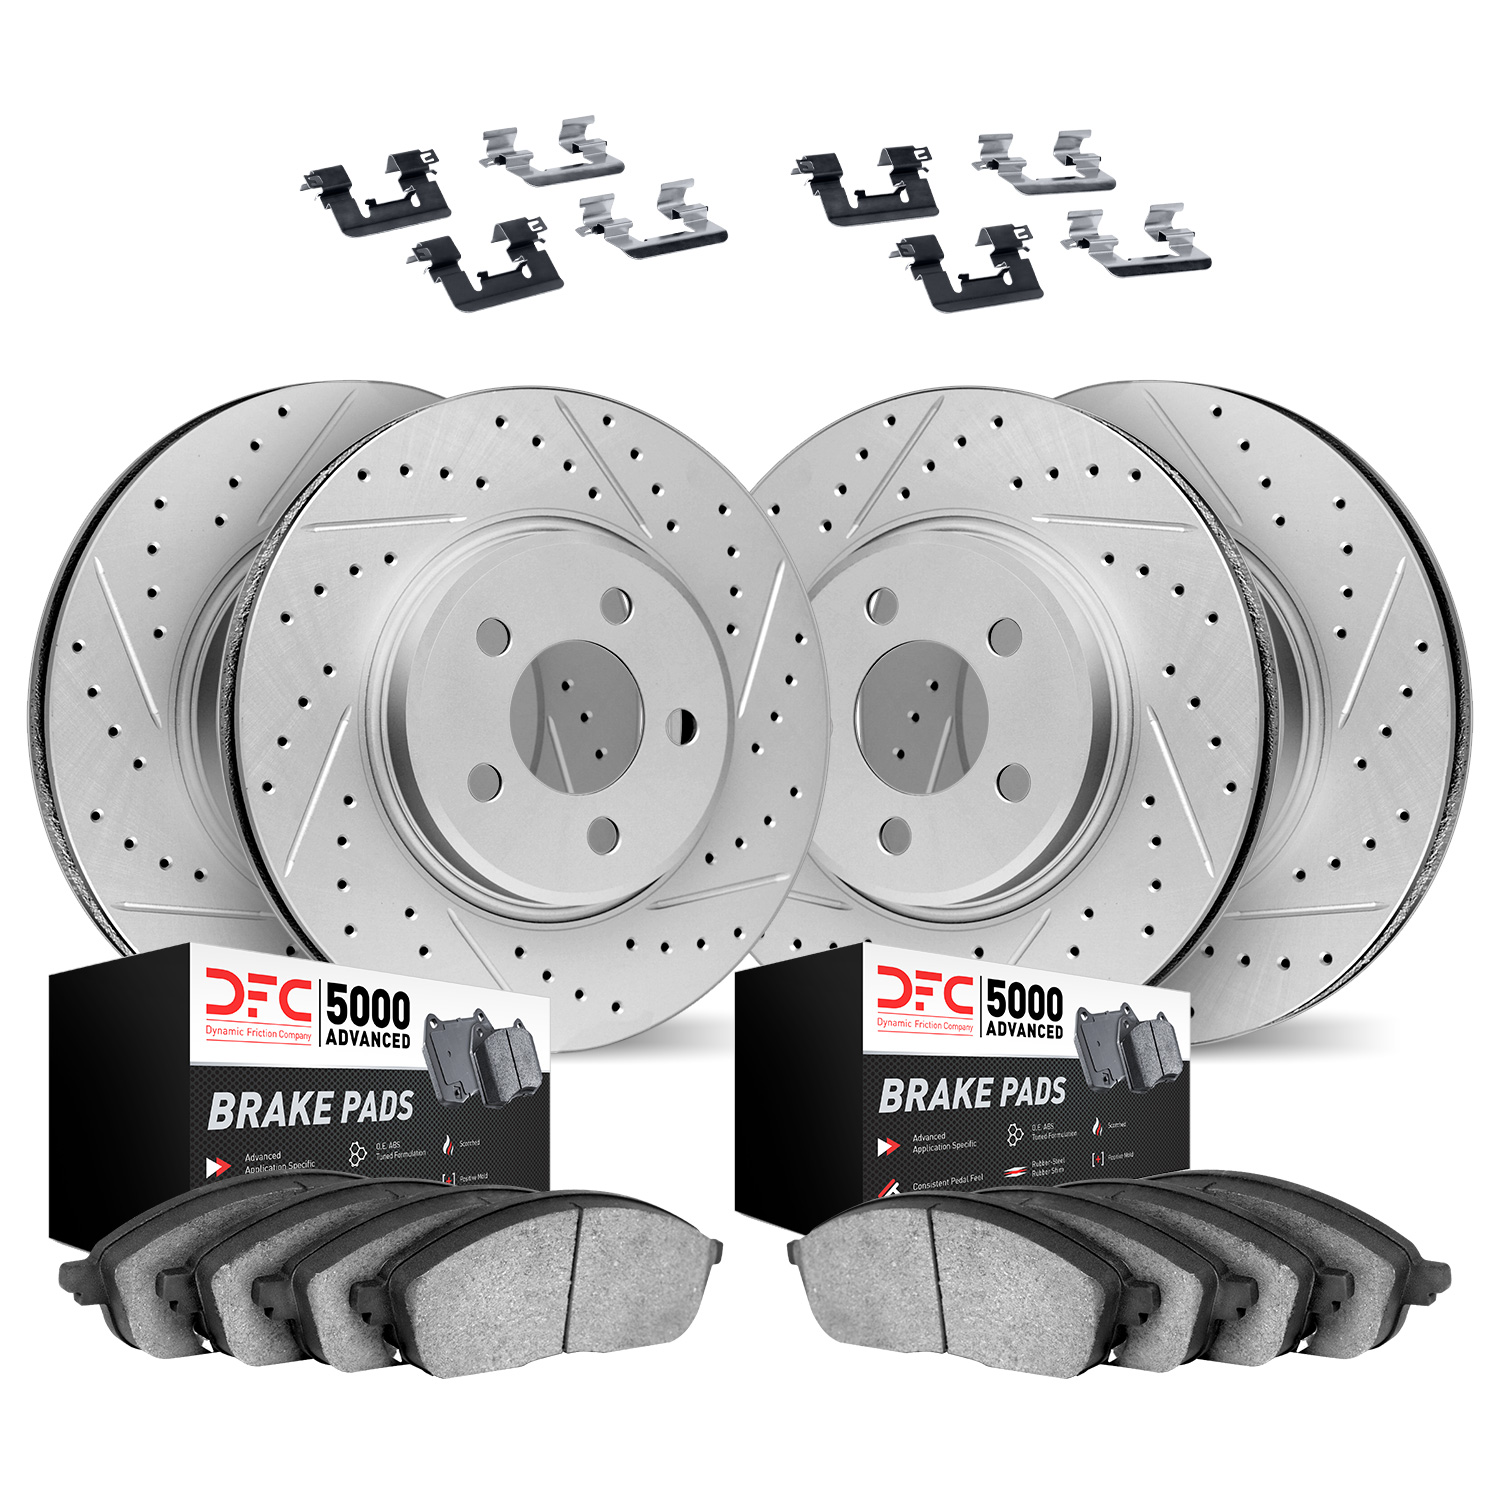 2514-48010 Geoperformance Drilled/Slotted Rotors w/5000 Advanced Brake Pads Kit & Hardware, 1997-2005 GM, Position: Front and Re